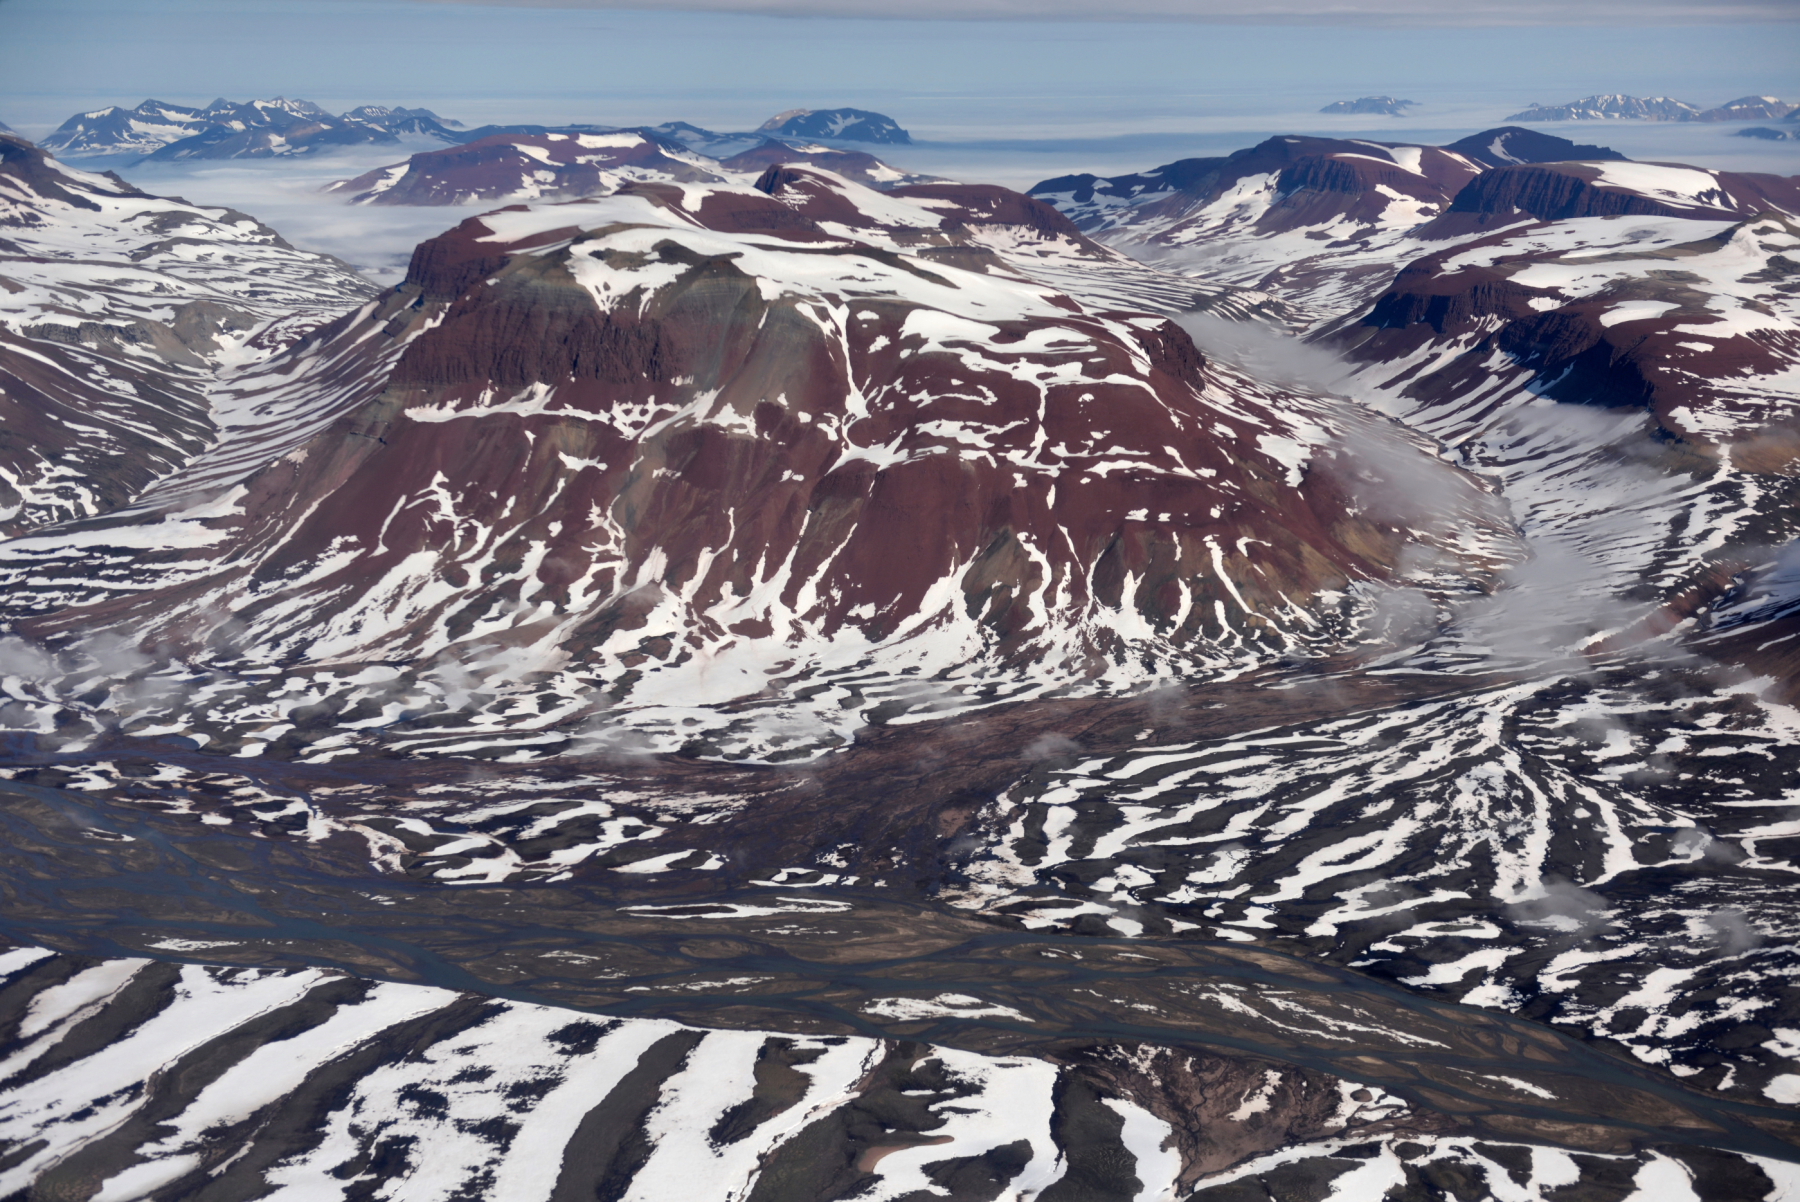 During our recent travels into the Arctic Circle, we were rewarded with many spectacular views from above of the Greenland landscape. This is one of our favourites. We just love the striking stripy pattern created by the colourful rocks and crisp white snow.